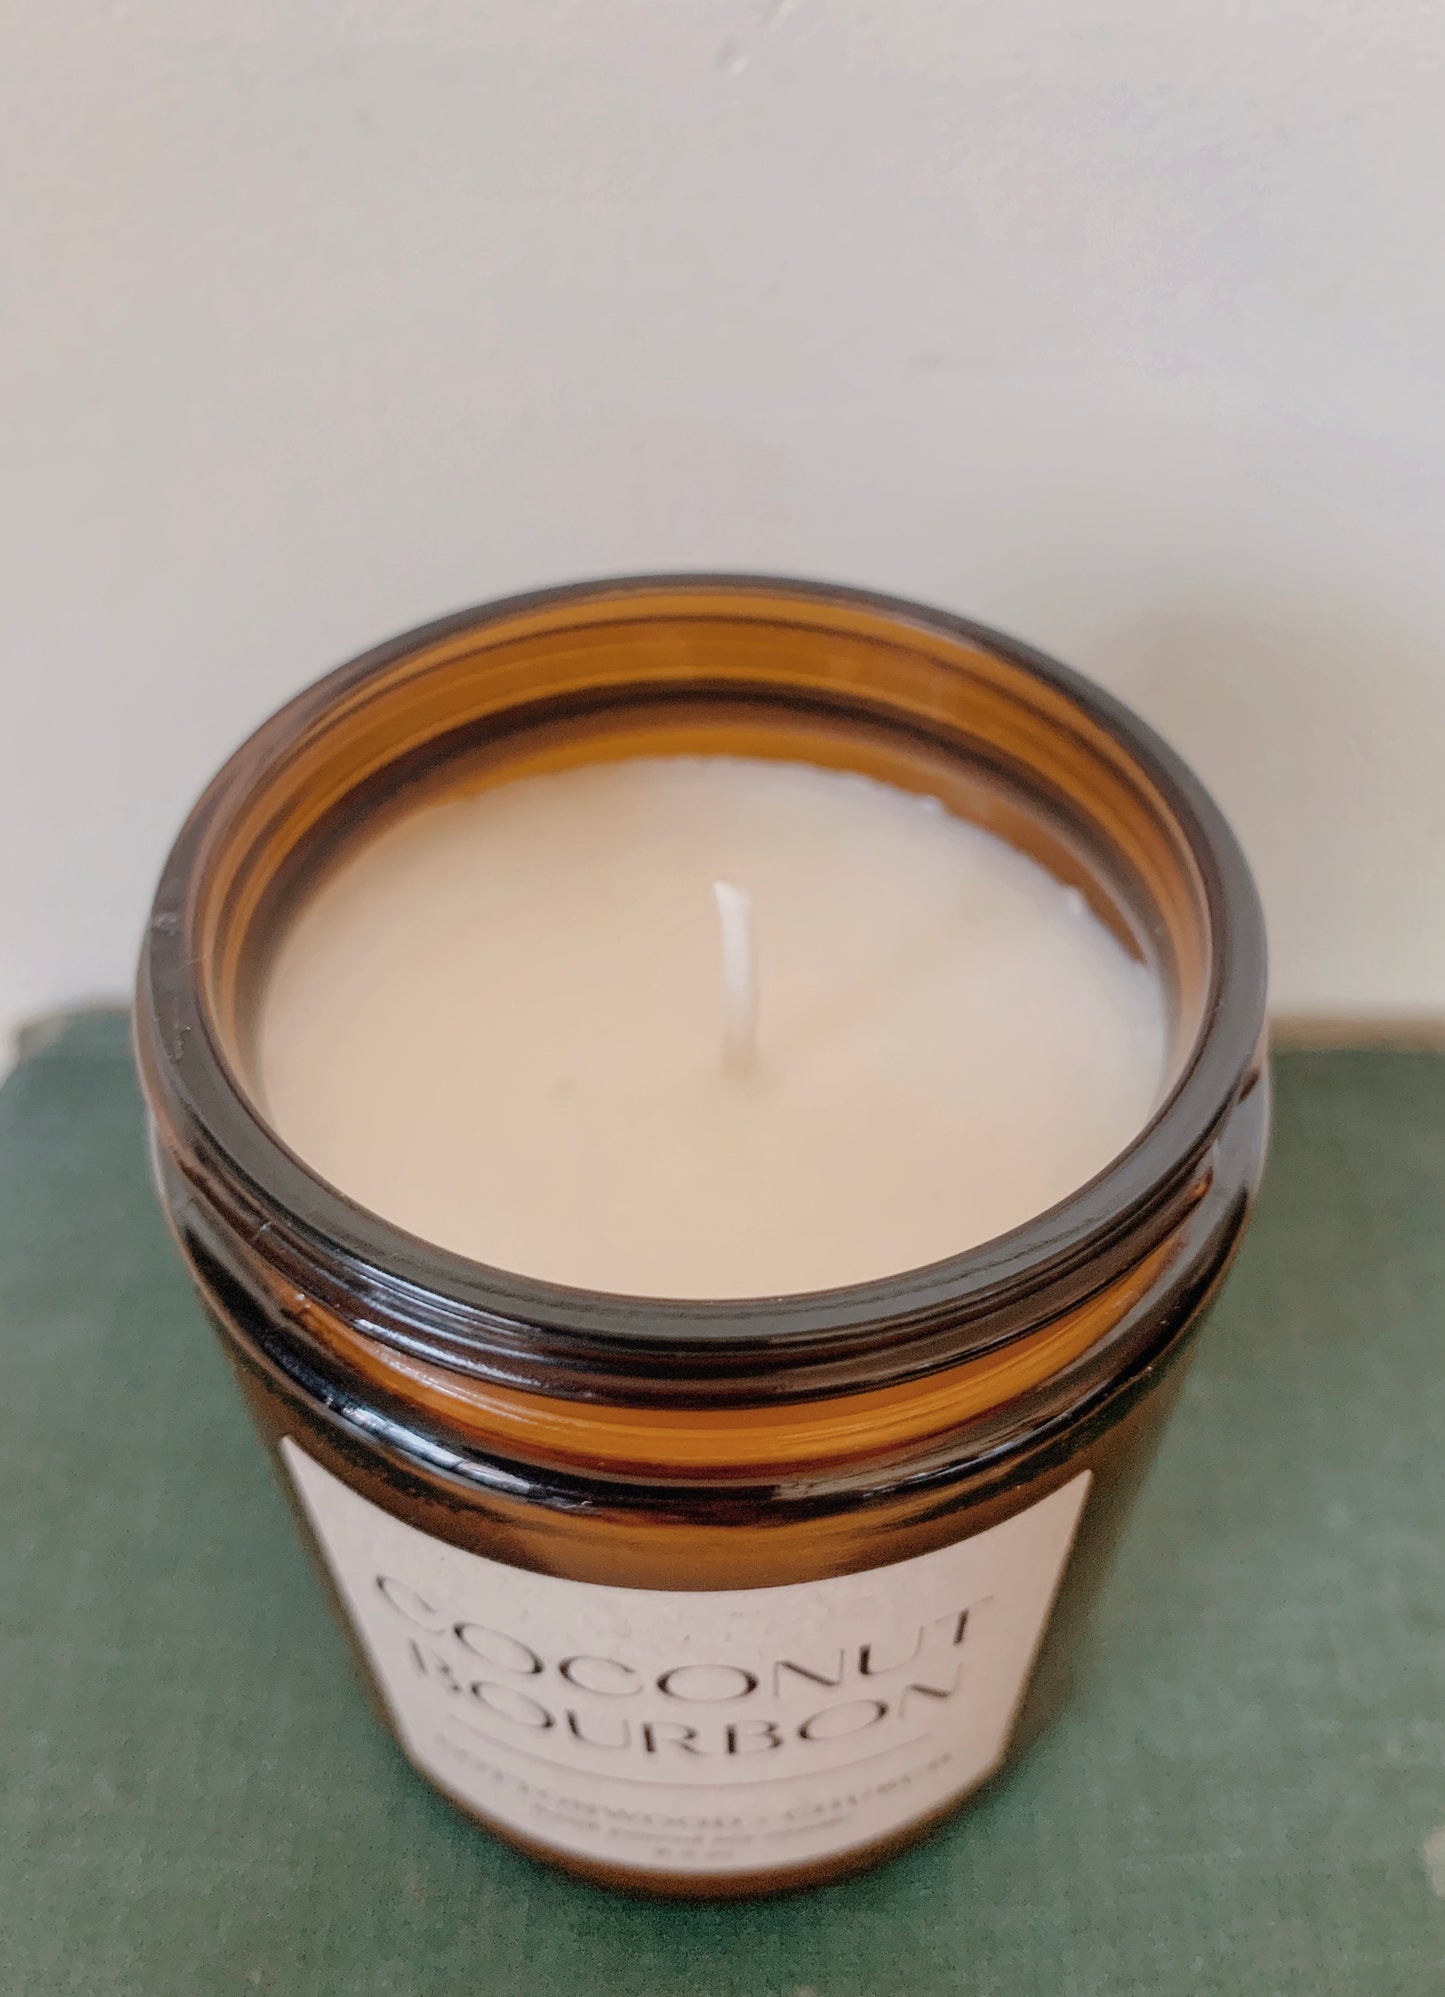 Coconut Bourbon Soy Candle